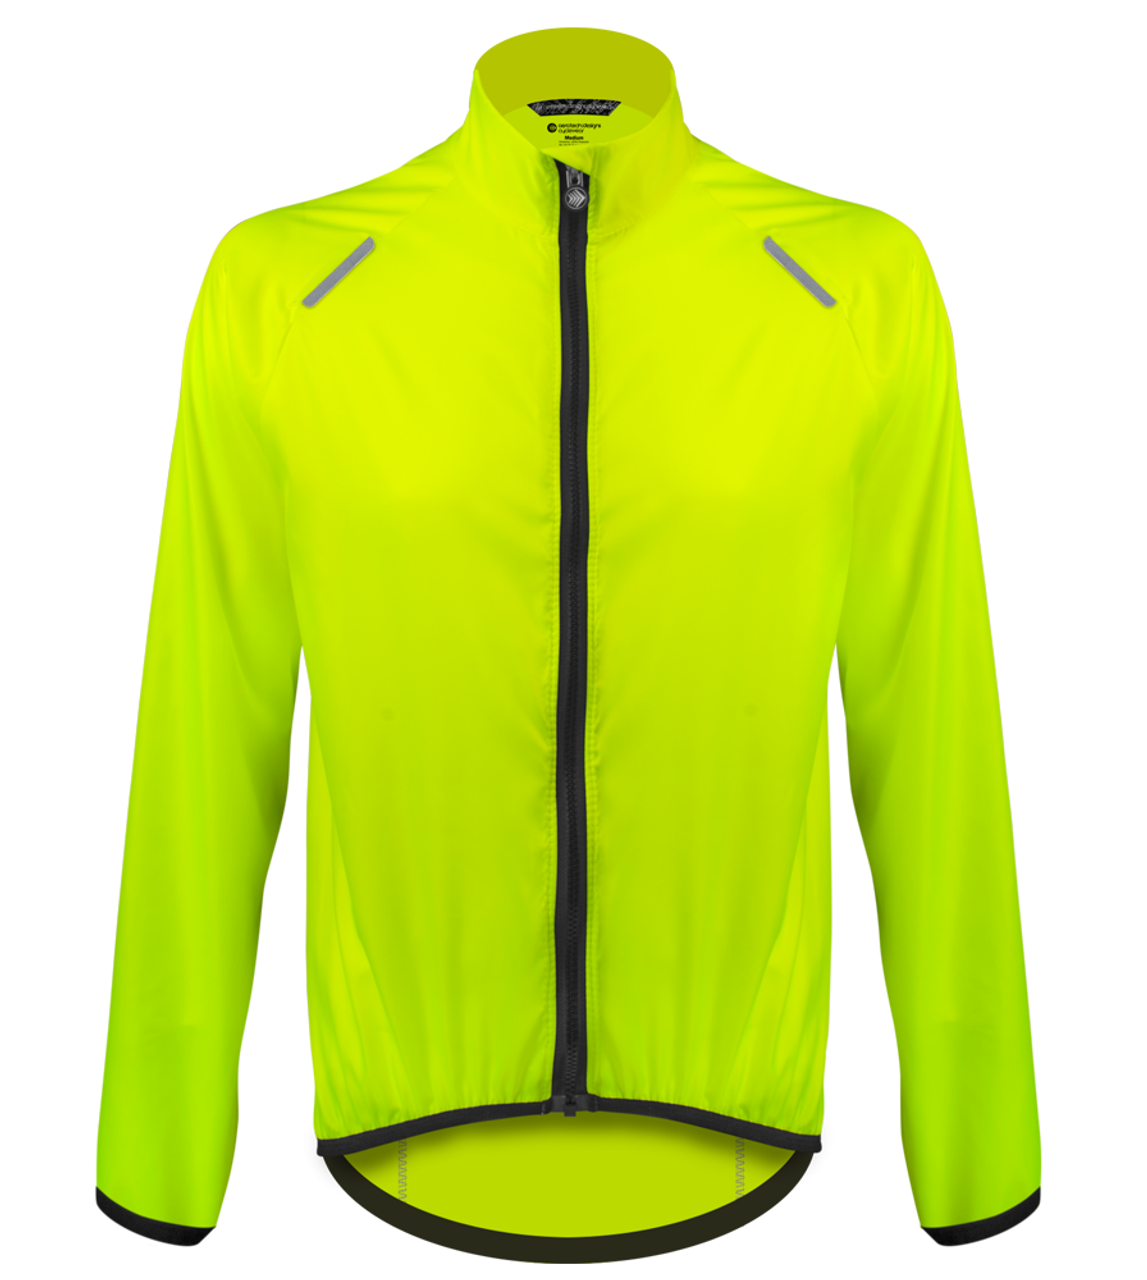 Men's Hi-Vis Safety Yellow Cycling Windbreaker Jacket Made in the USA